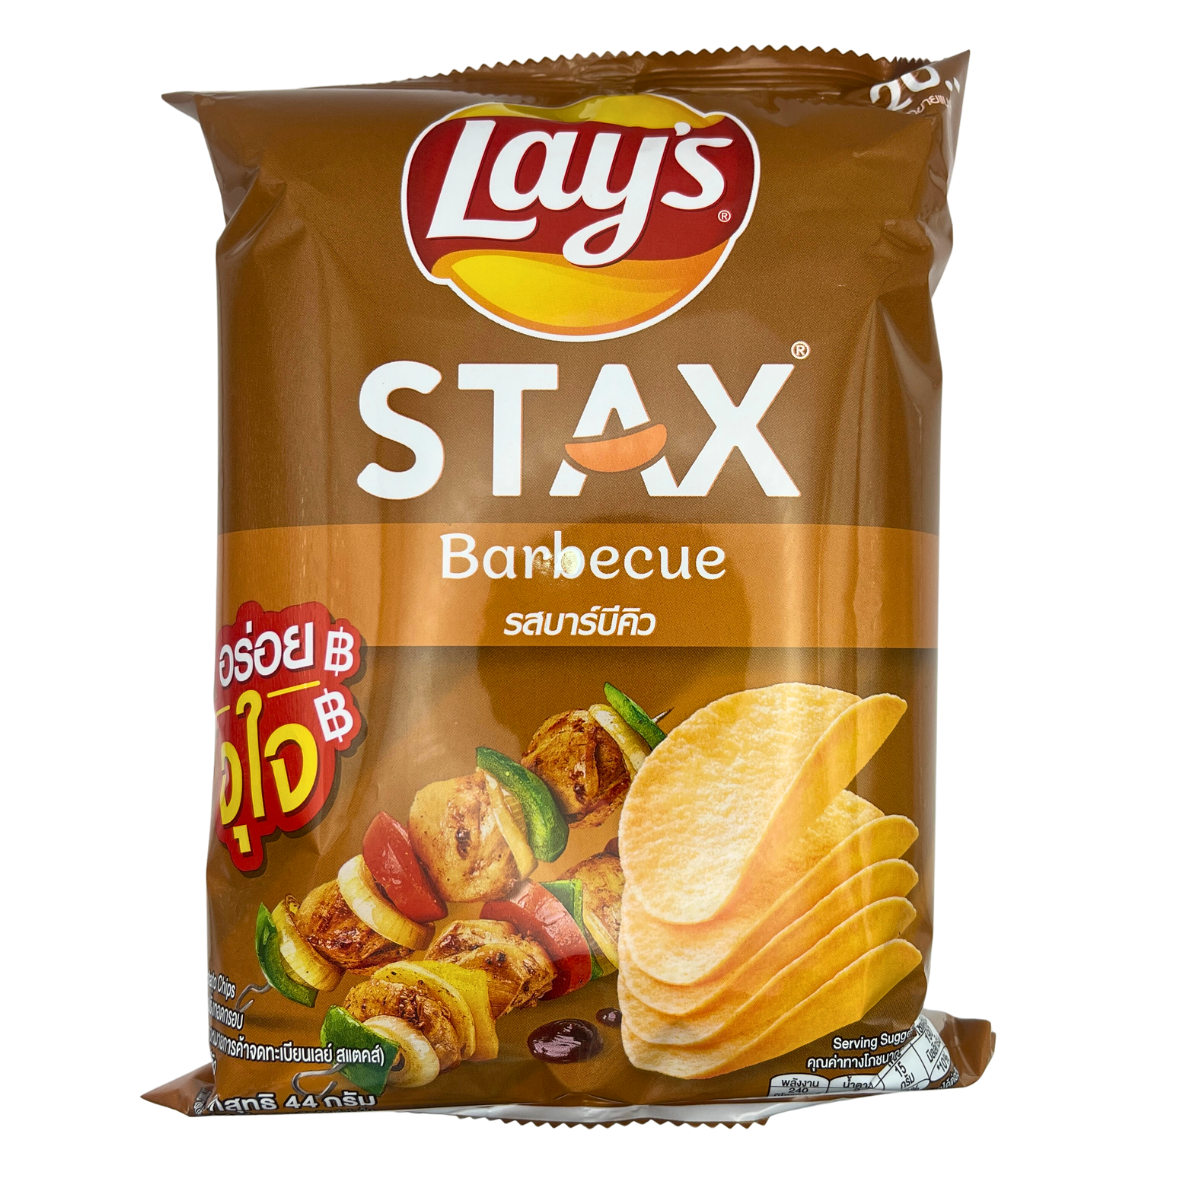 Lay's Stax Barbecue